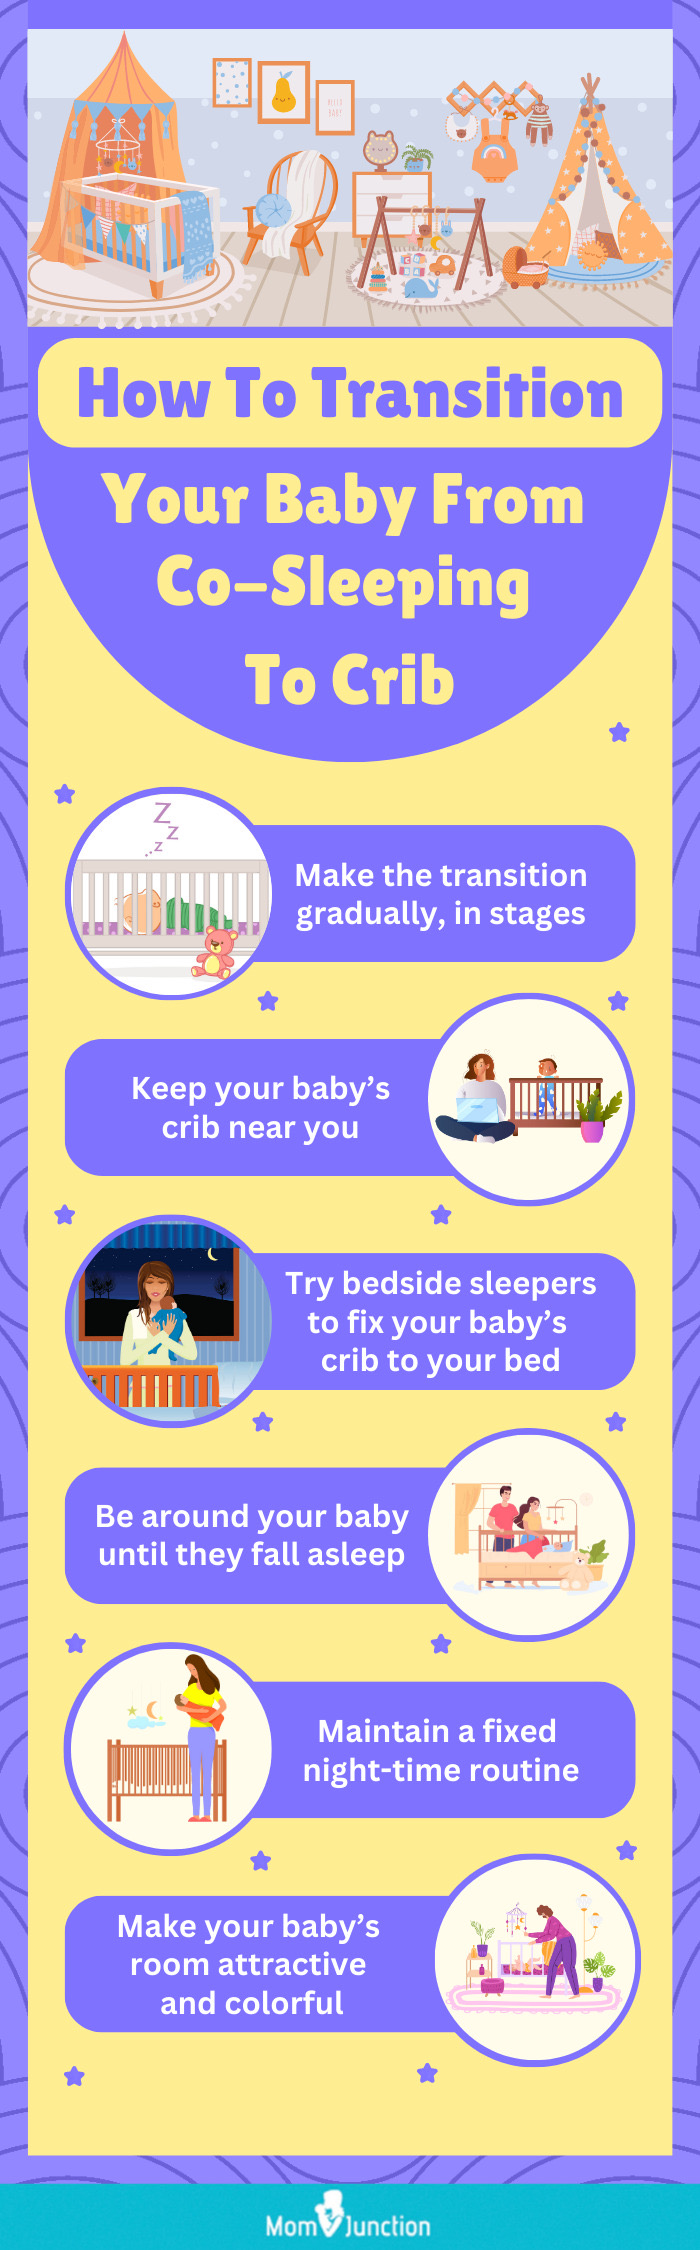 tips on transitioning babies from co-sleeping to crib [infographic]